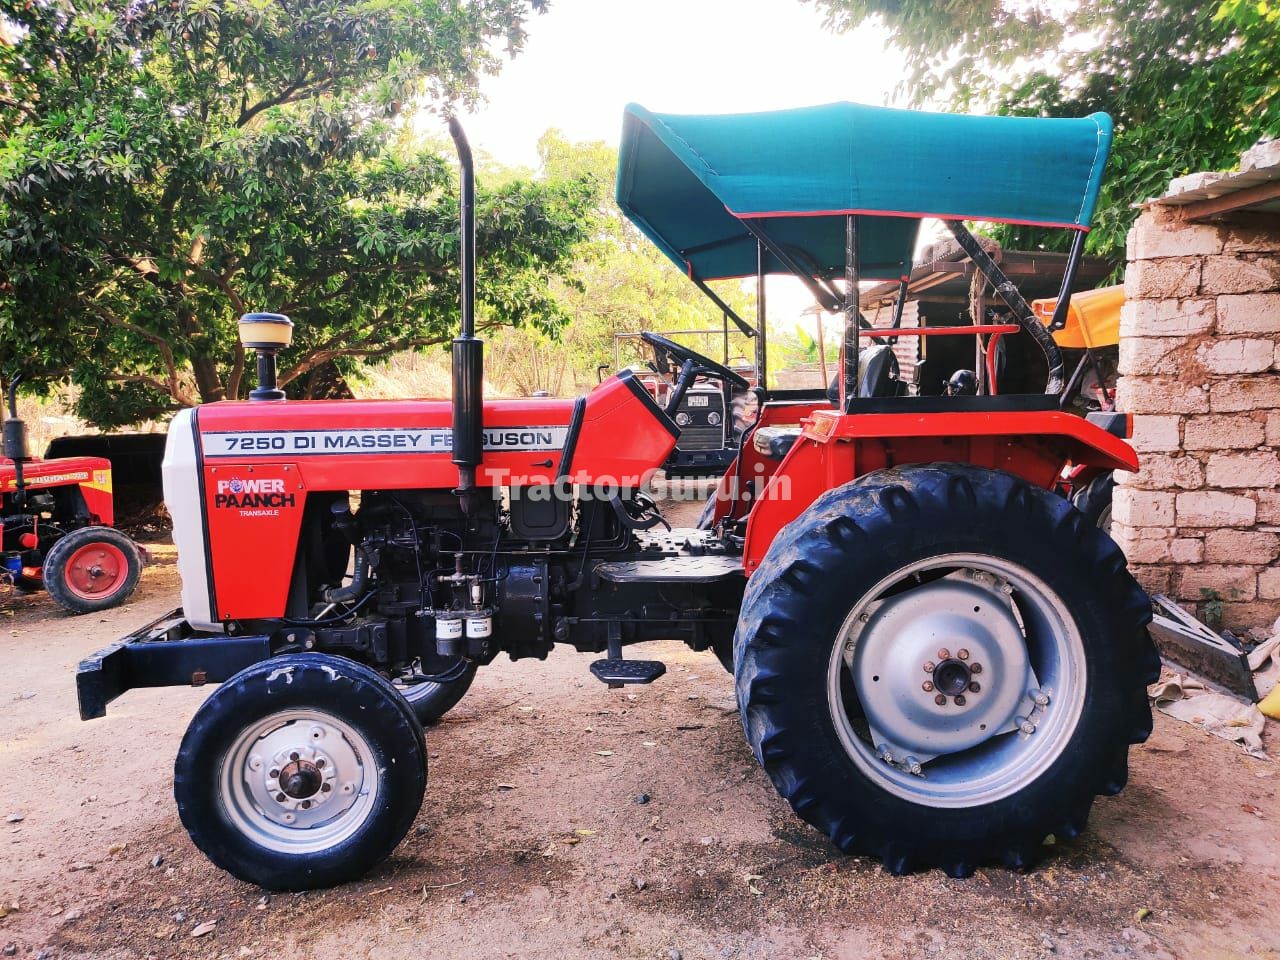 Get Second Hand Massey Ferguson 7250 DI Tractor in Good Condition - 3213